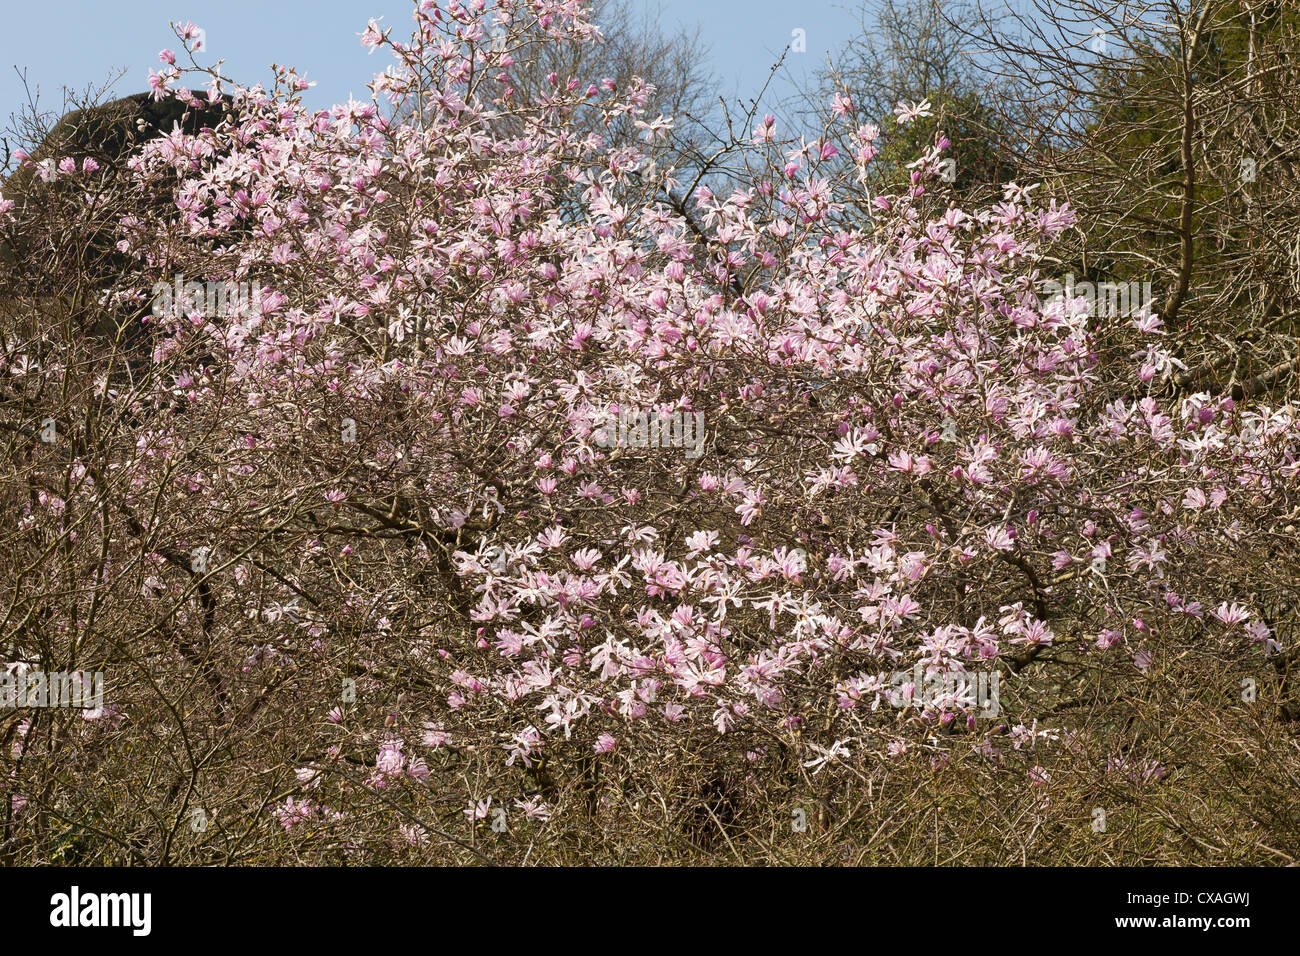 Large Magnolia tree (Magnolia sp) flowering in a garden. Powys, Wales. March. Stock Photo